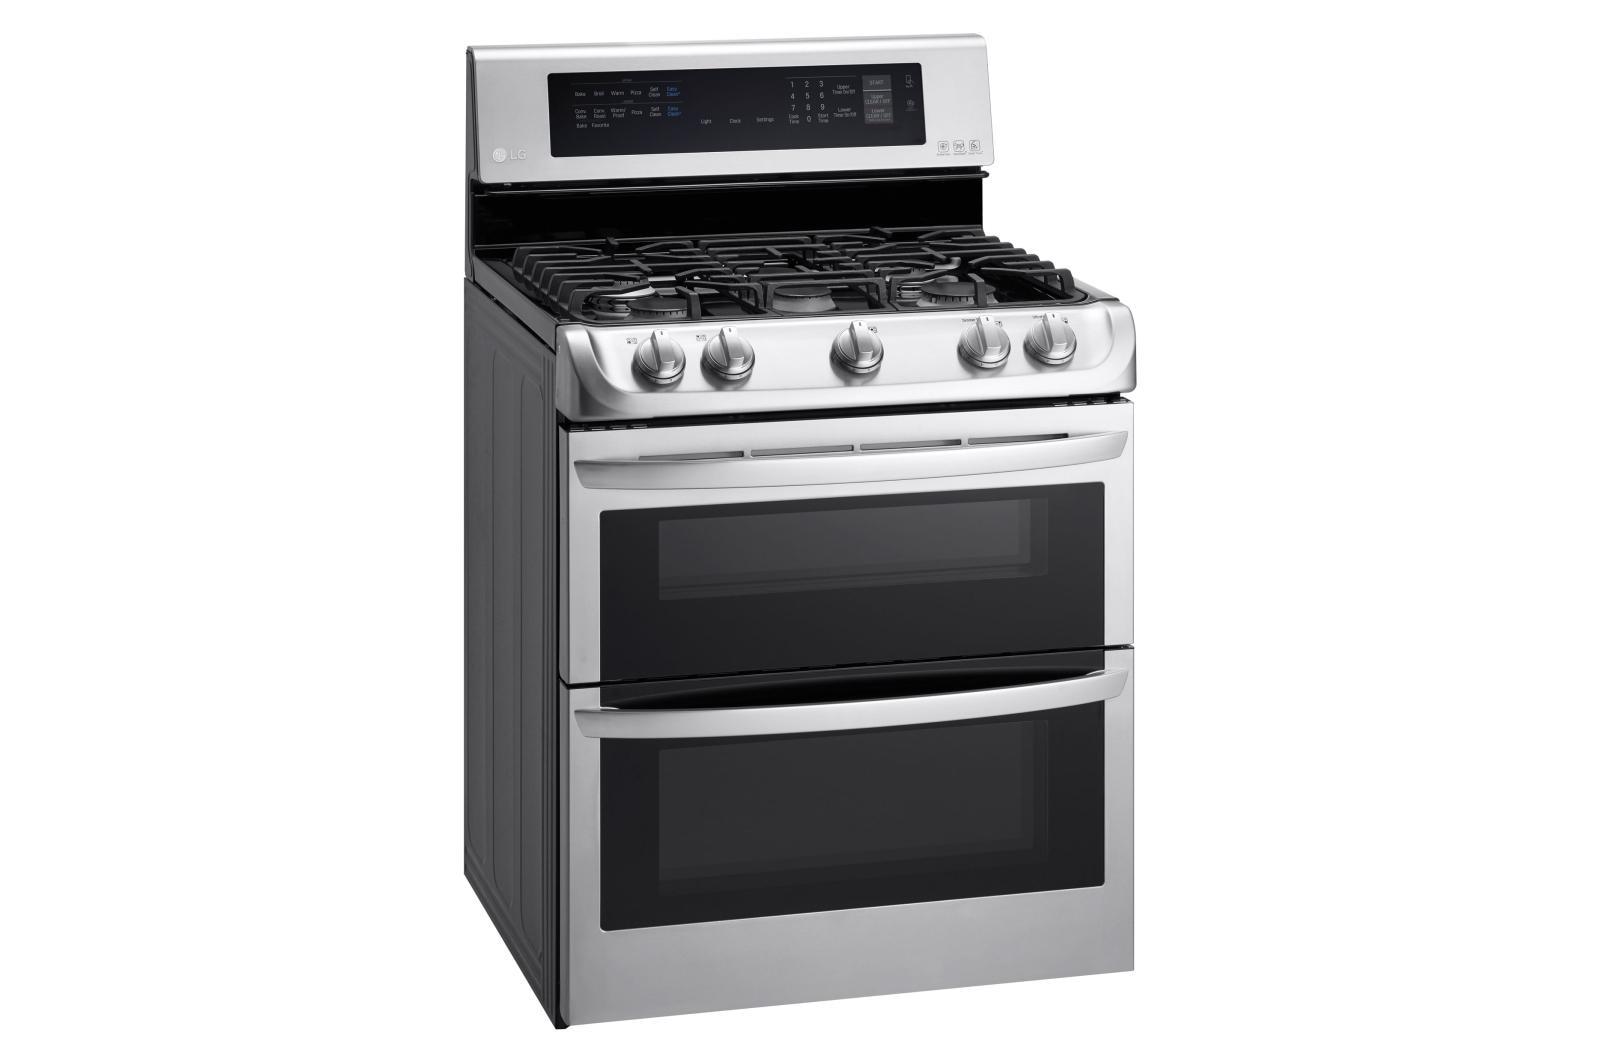 Lg 6.9 cu. ft. Gas Double Oven Range with ProBake Convection® and EasyClean®